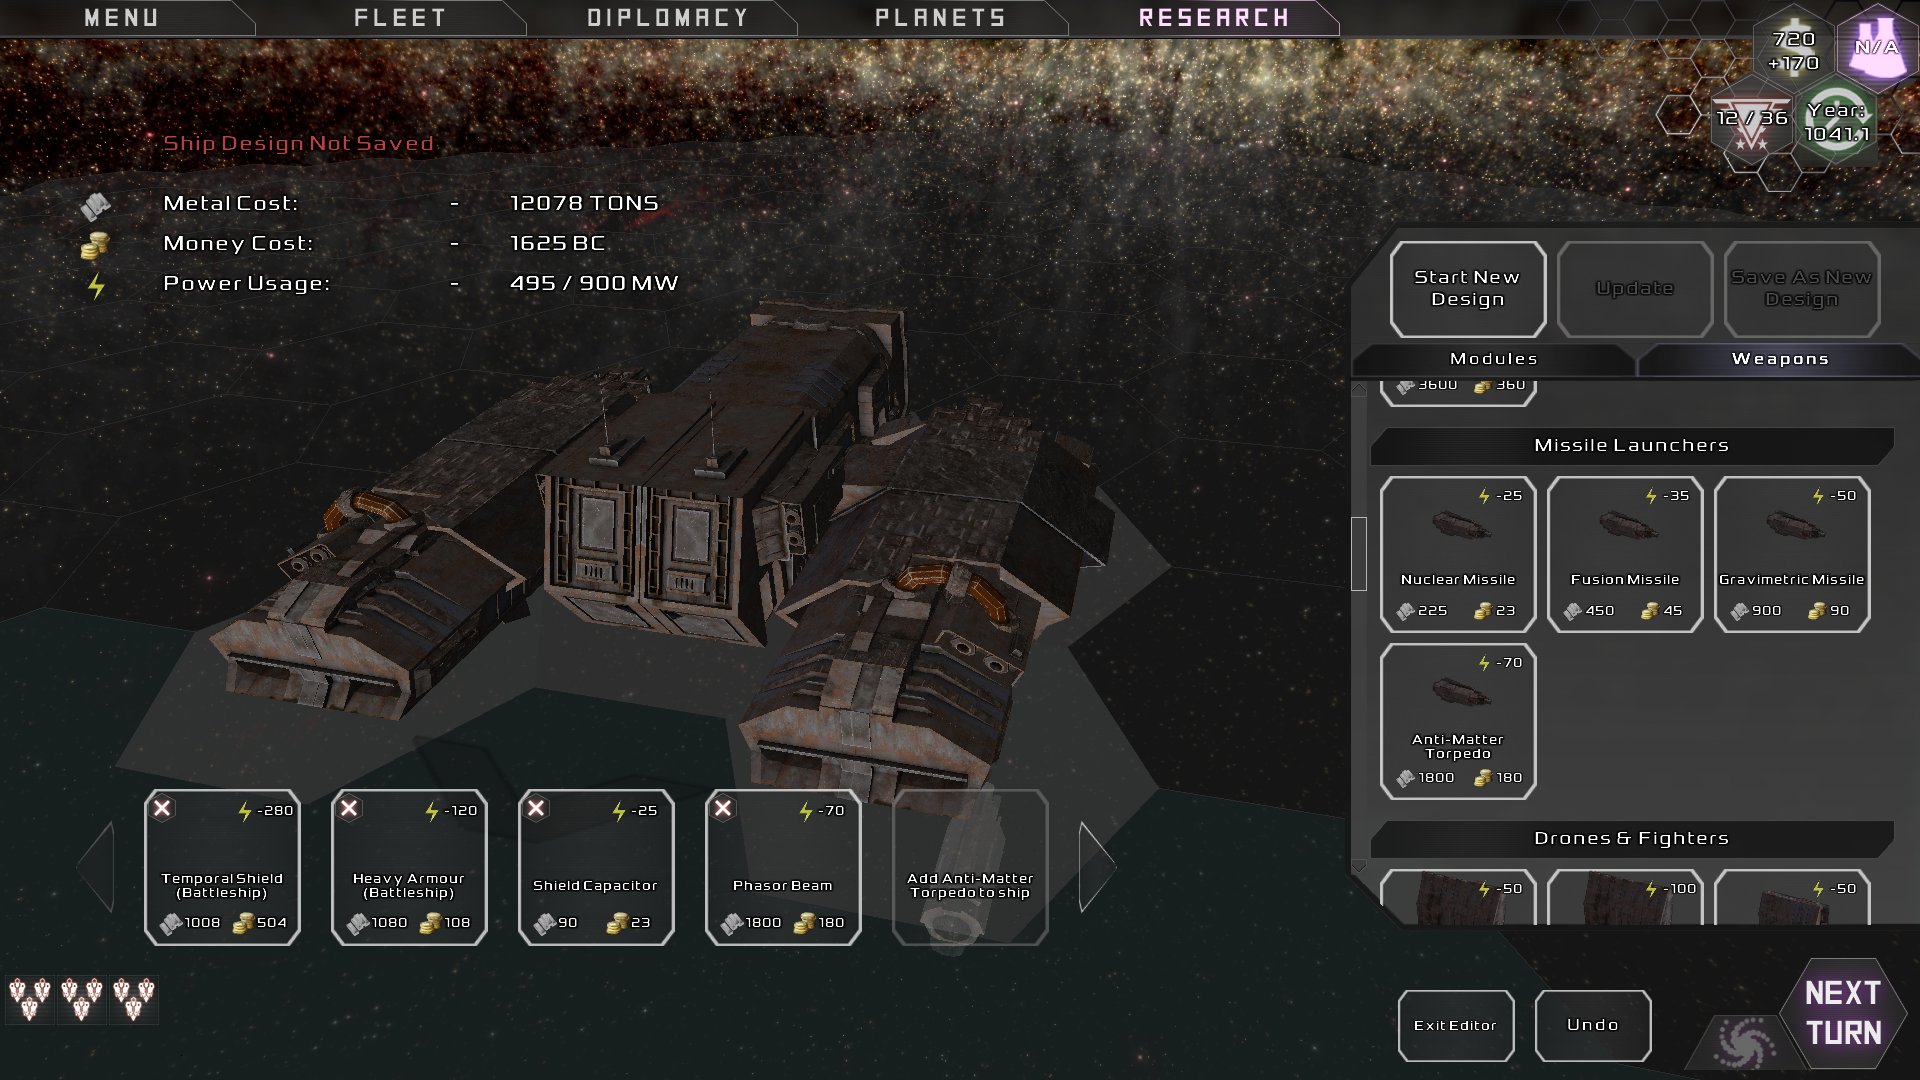 Dev Update: V1.10 released. Simple Ship Designer, Refitting, Star Claims  Overhaul, Asteroid Belts, Fleet Combat UI Overhaul, Race Iteration, and  tons more! - Predestination - an indie space 4X game